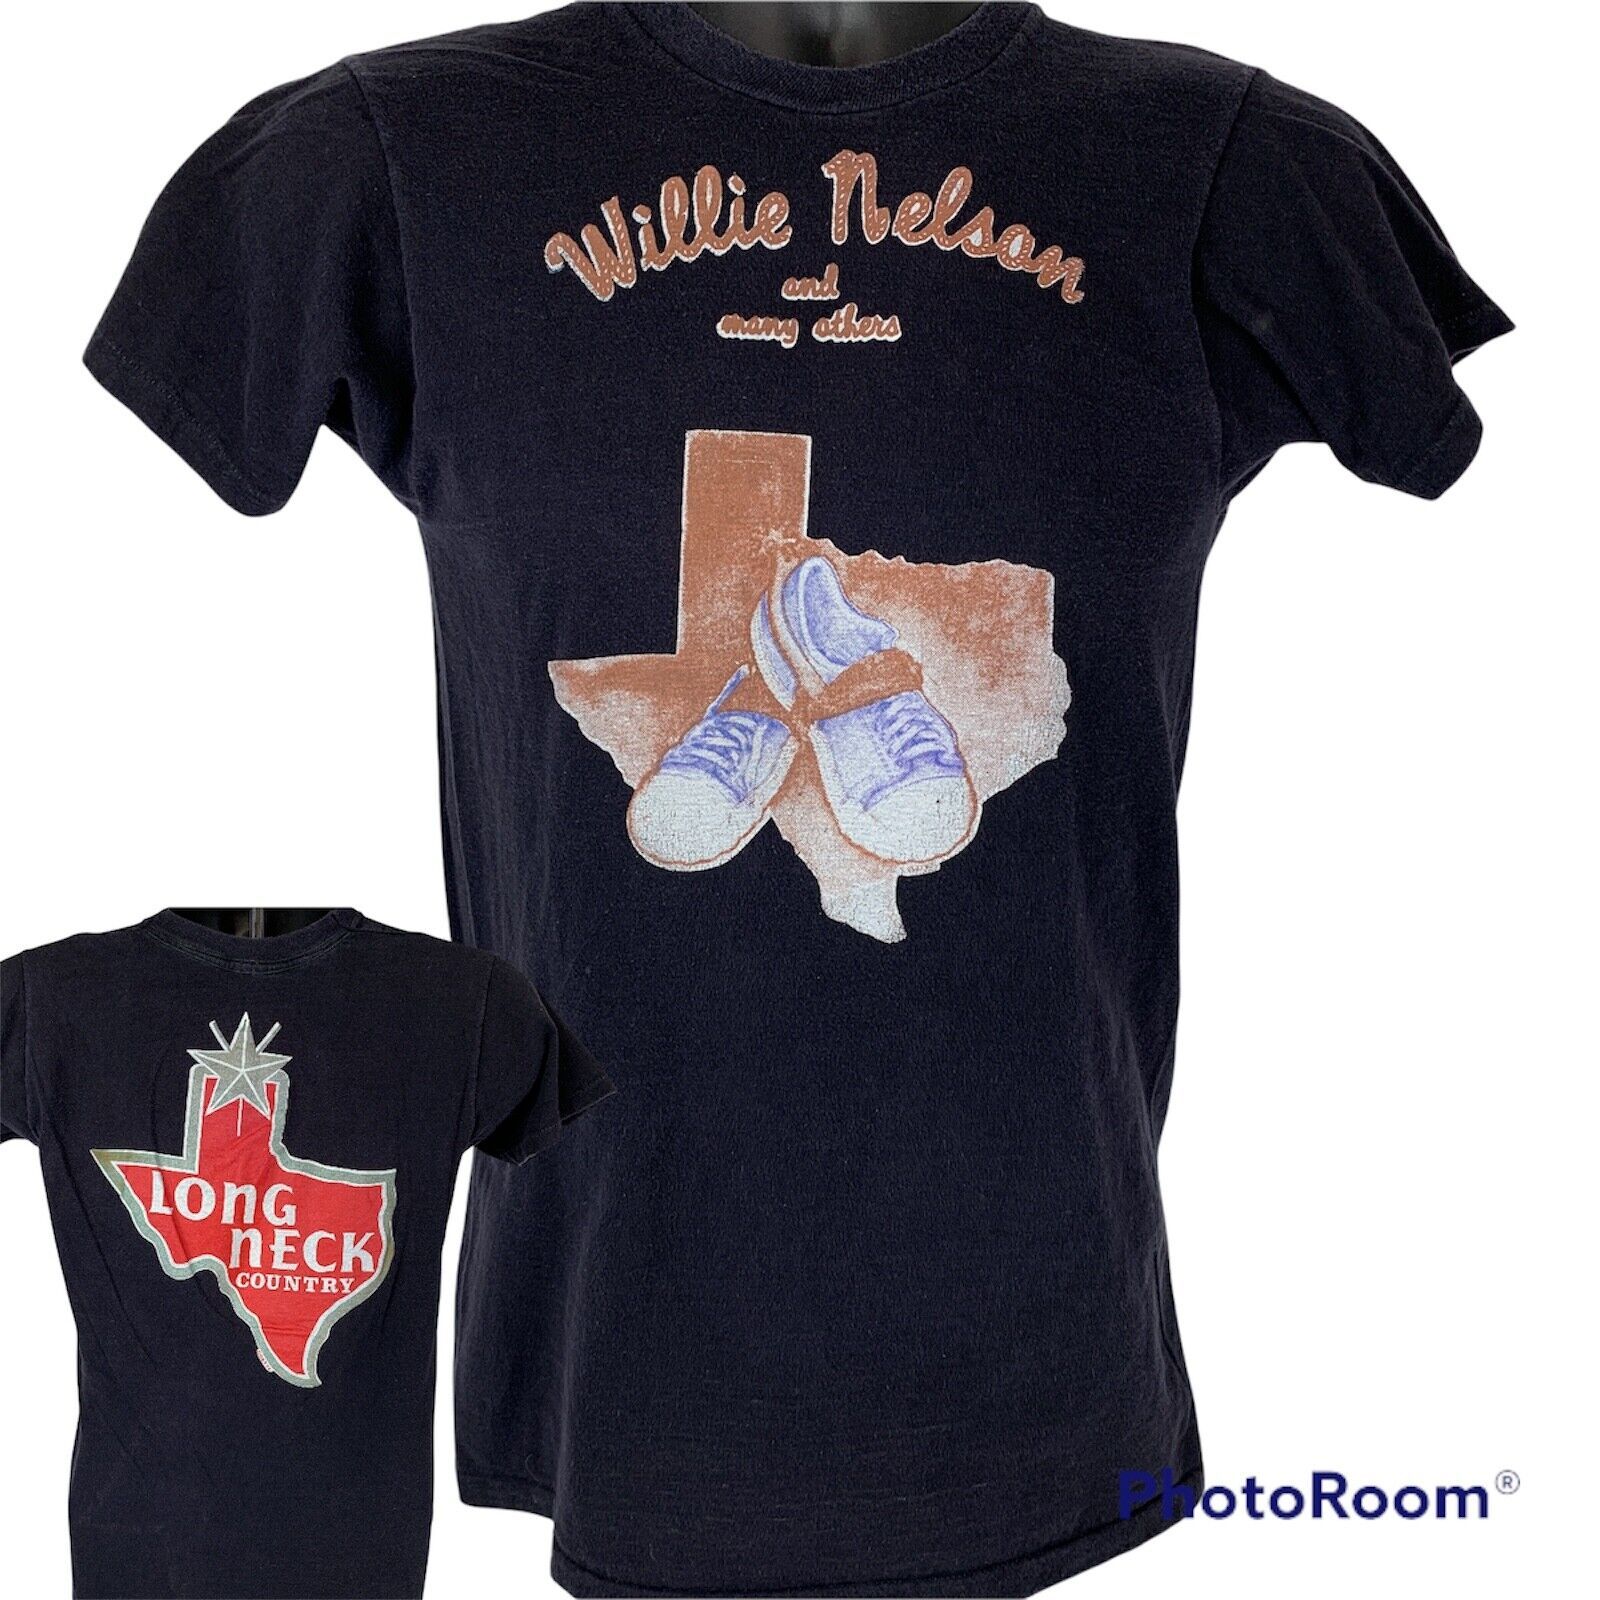 Vintage Willie Nelson Lone Star Beer Vintage 70s T Shirt Small 1974 Size US S / EU 44-46 / 1 - 1 Preview